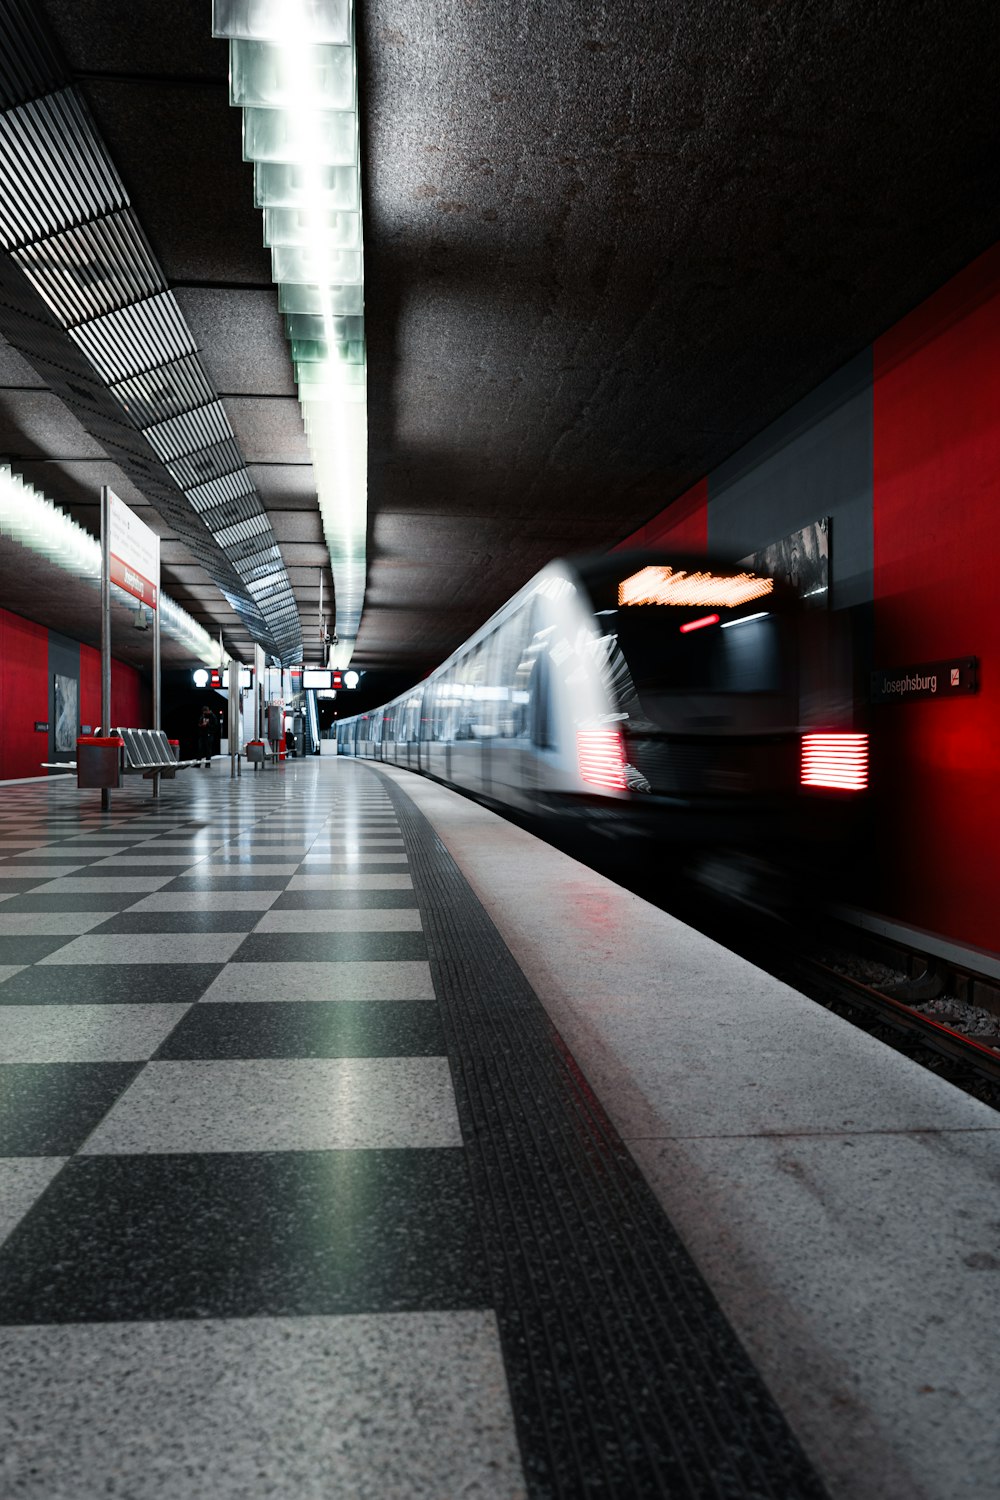 a train traveling through a train station next to a checkered floor